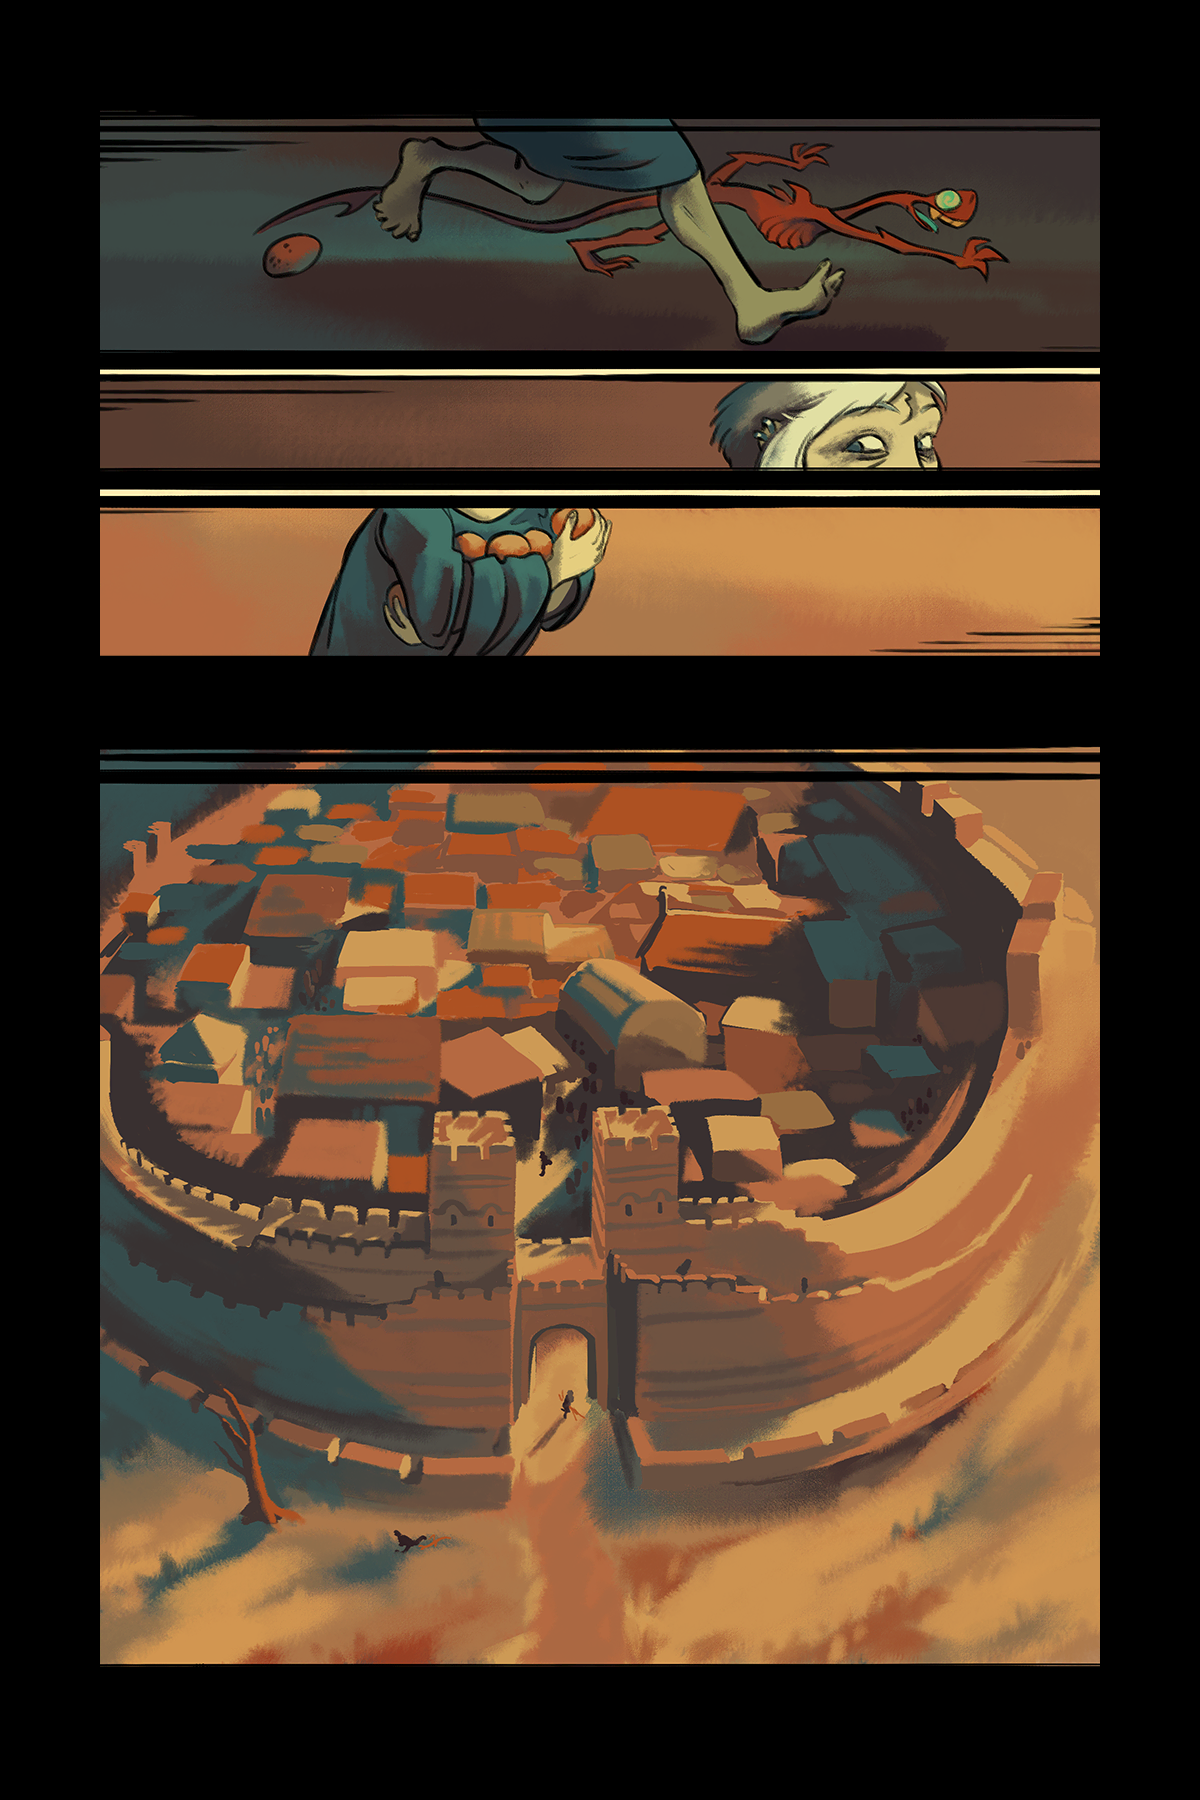 Three long narrow panels- the first showing someone's feet as they're running, with the lizard-like creature from previous images on their heels; the second showing their nervous eyes as they look over one shoulder; the third showing several oranges they're clutching to their chest. Then there is a large zoomed out panel showing the gates of a walled city at sunset, with a tiny figure of a person running out the gates.